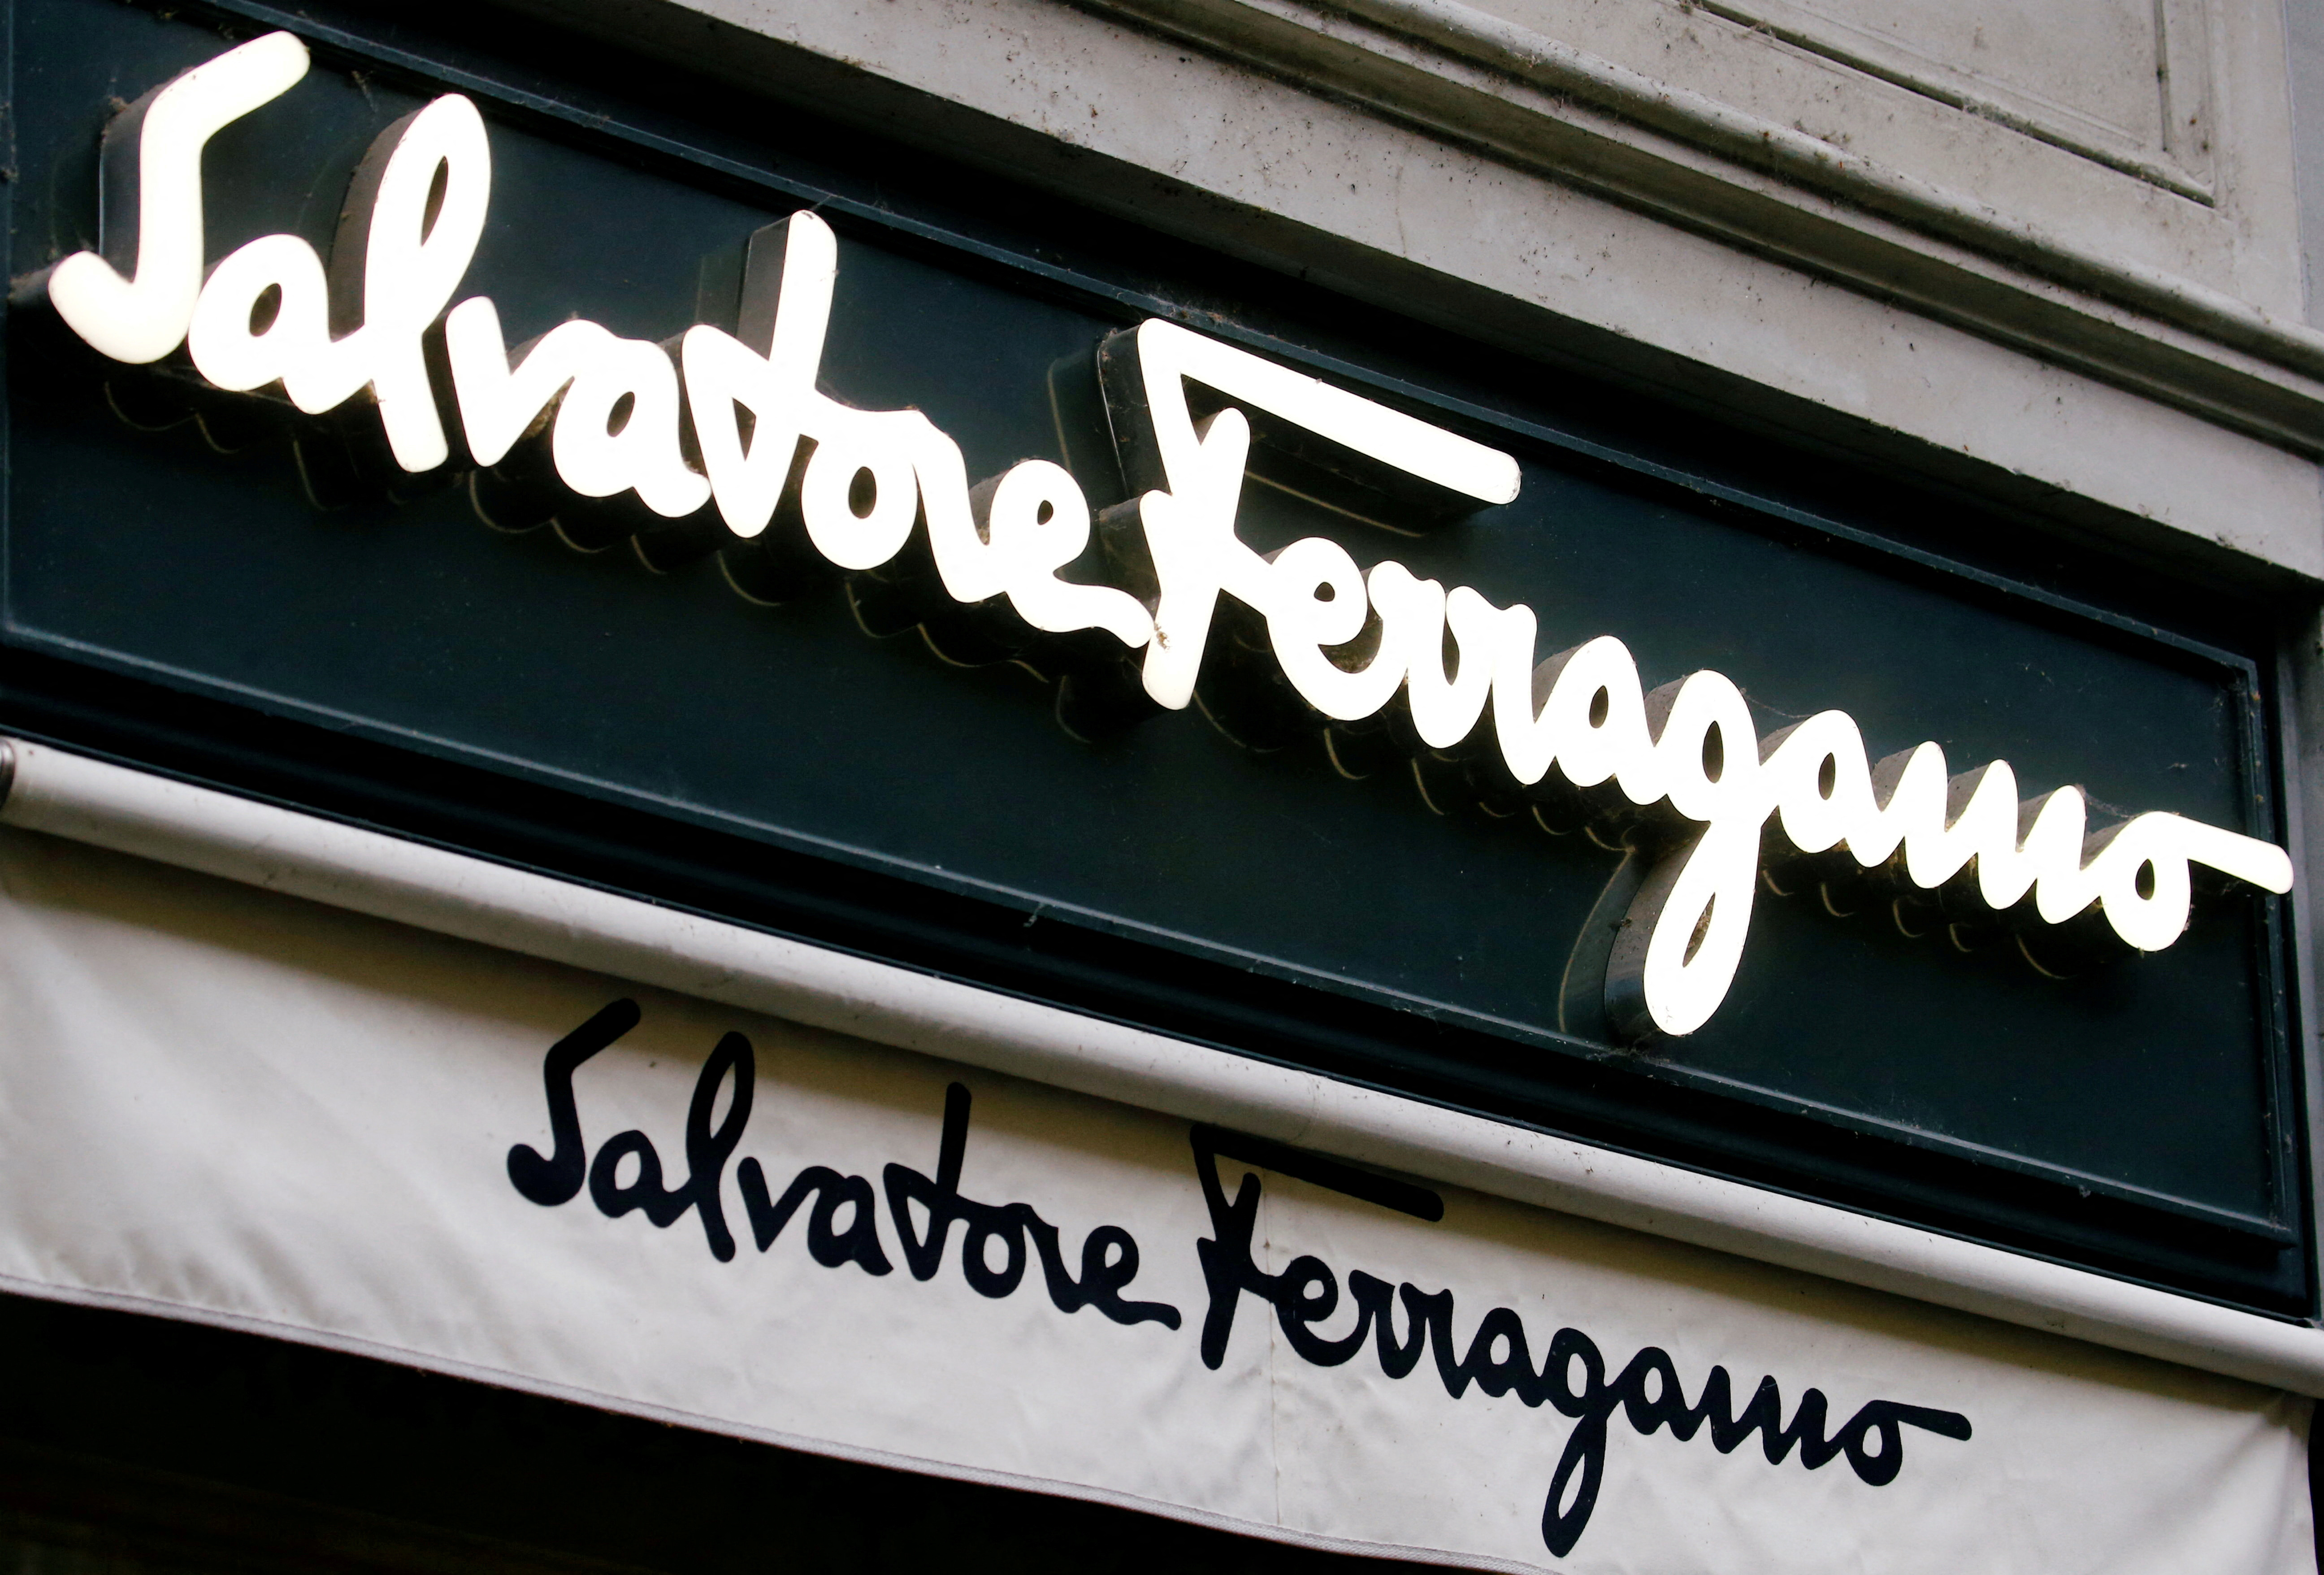 And Here's Salvatore Ferragamo's Most Iconic, The Top Handle